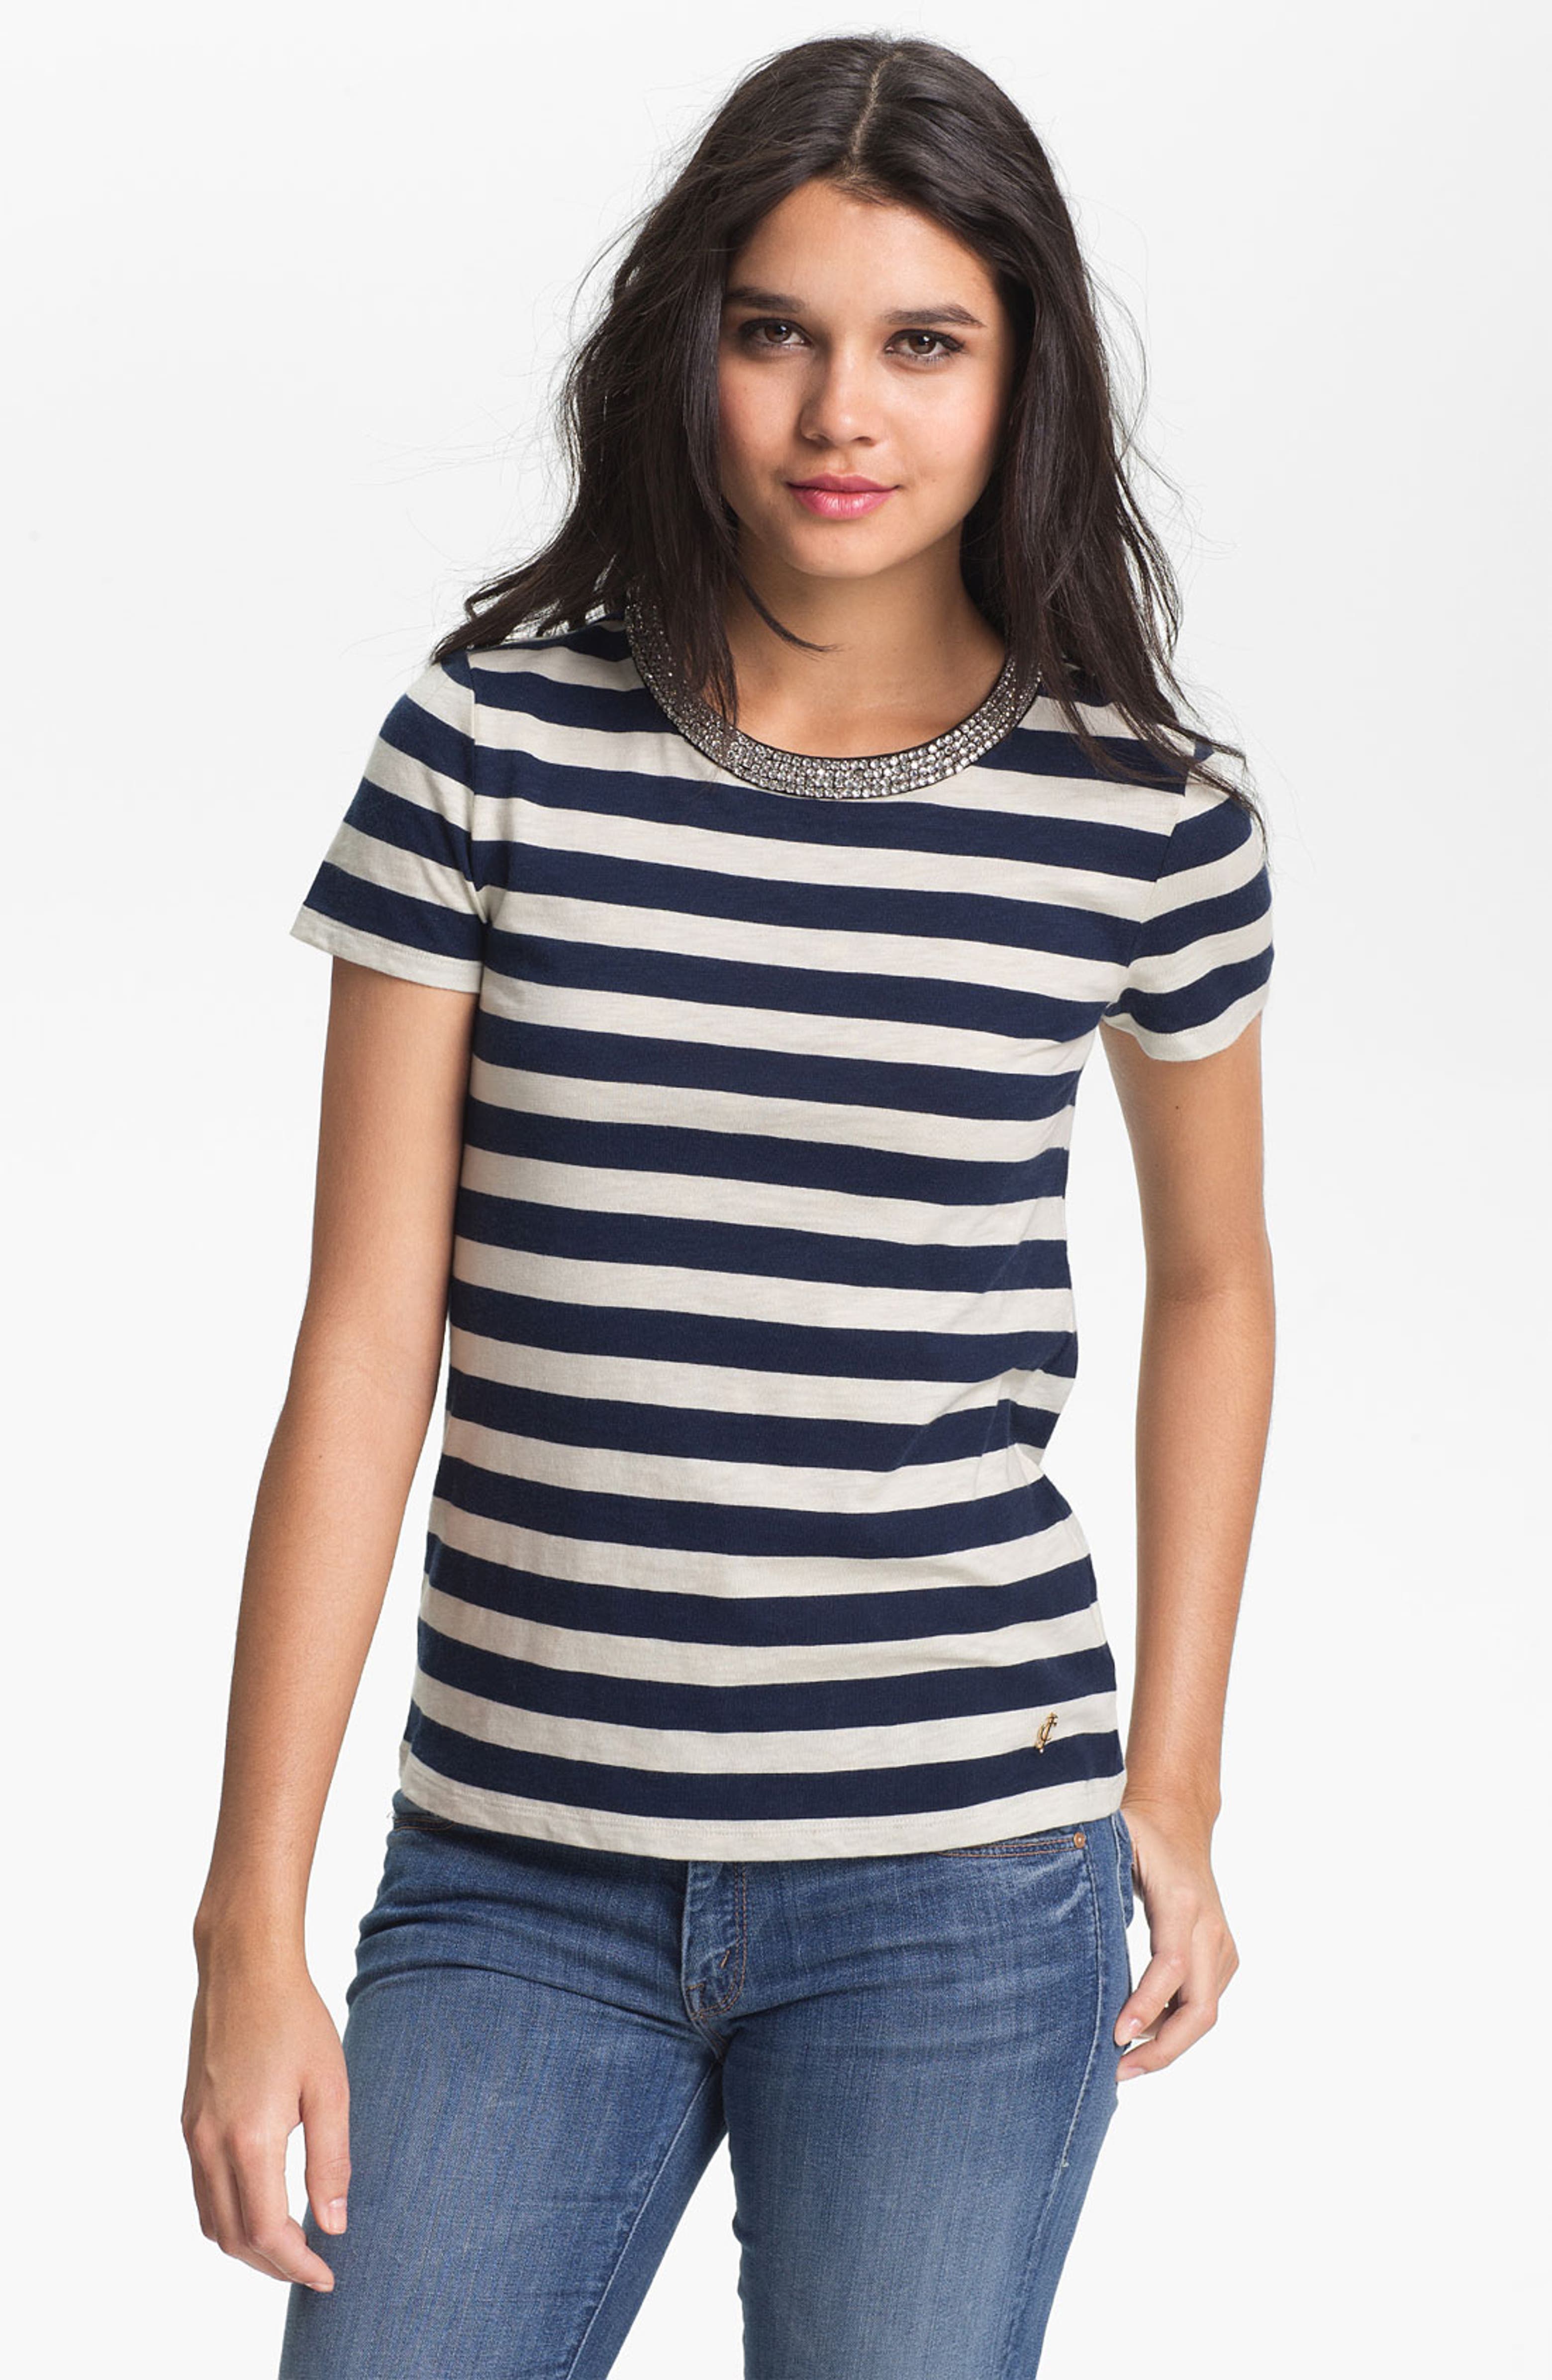 Juicy Couture 'Holly' Rhinestone Neck Stripe Tee | Nordstrom